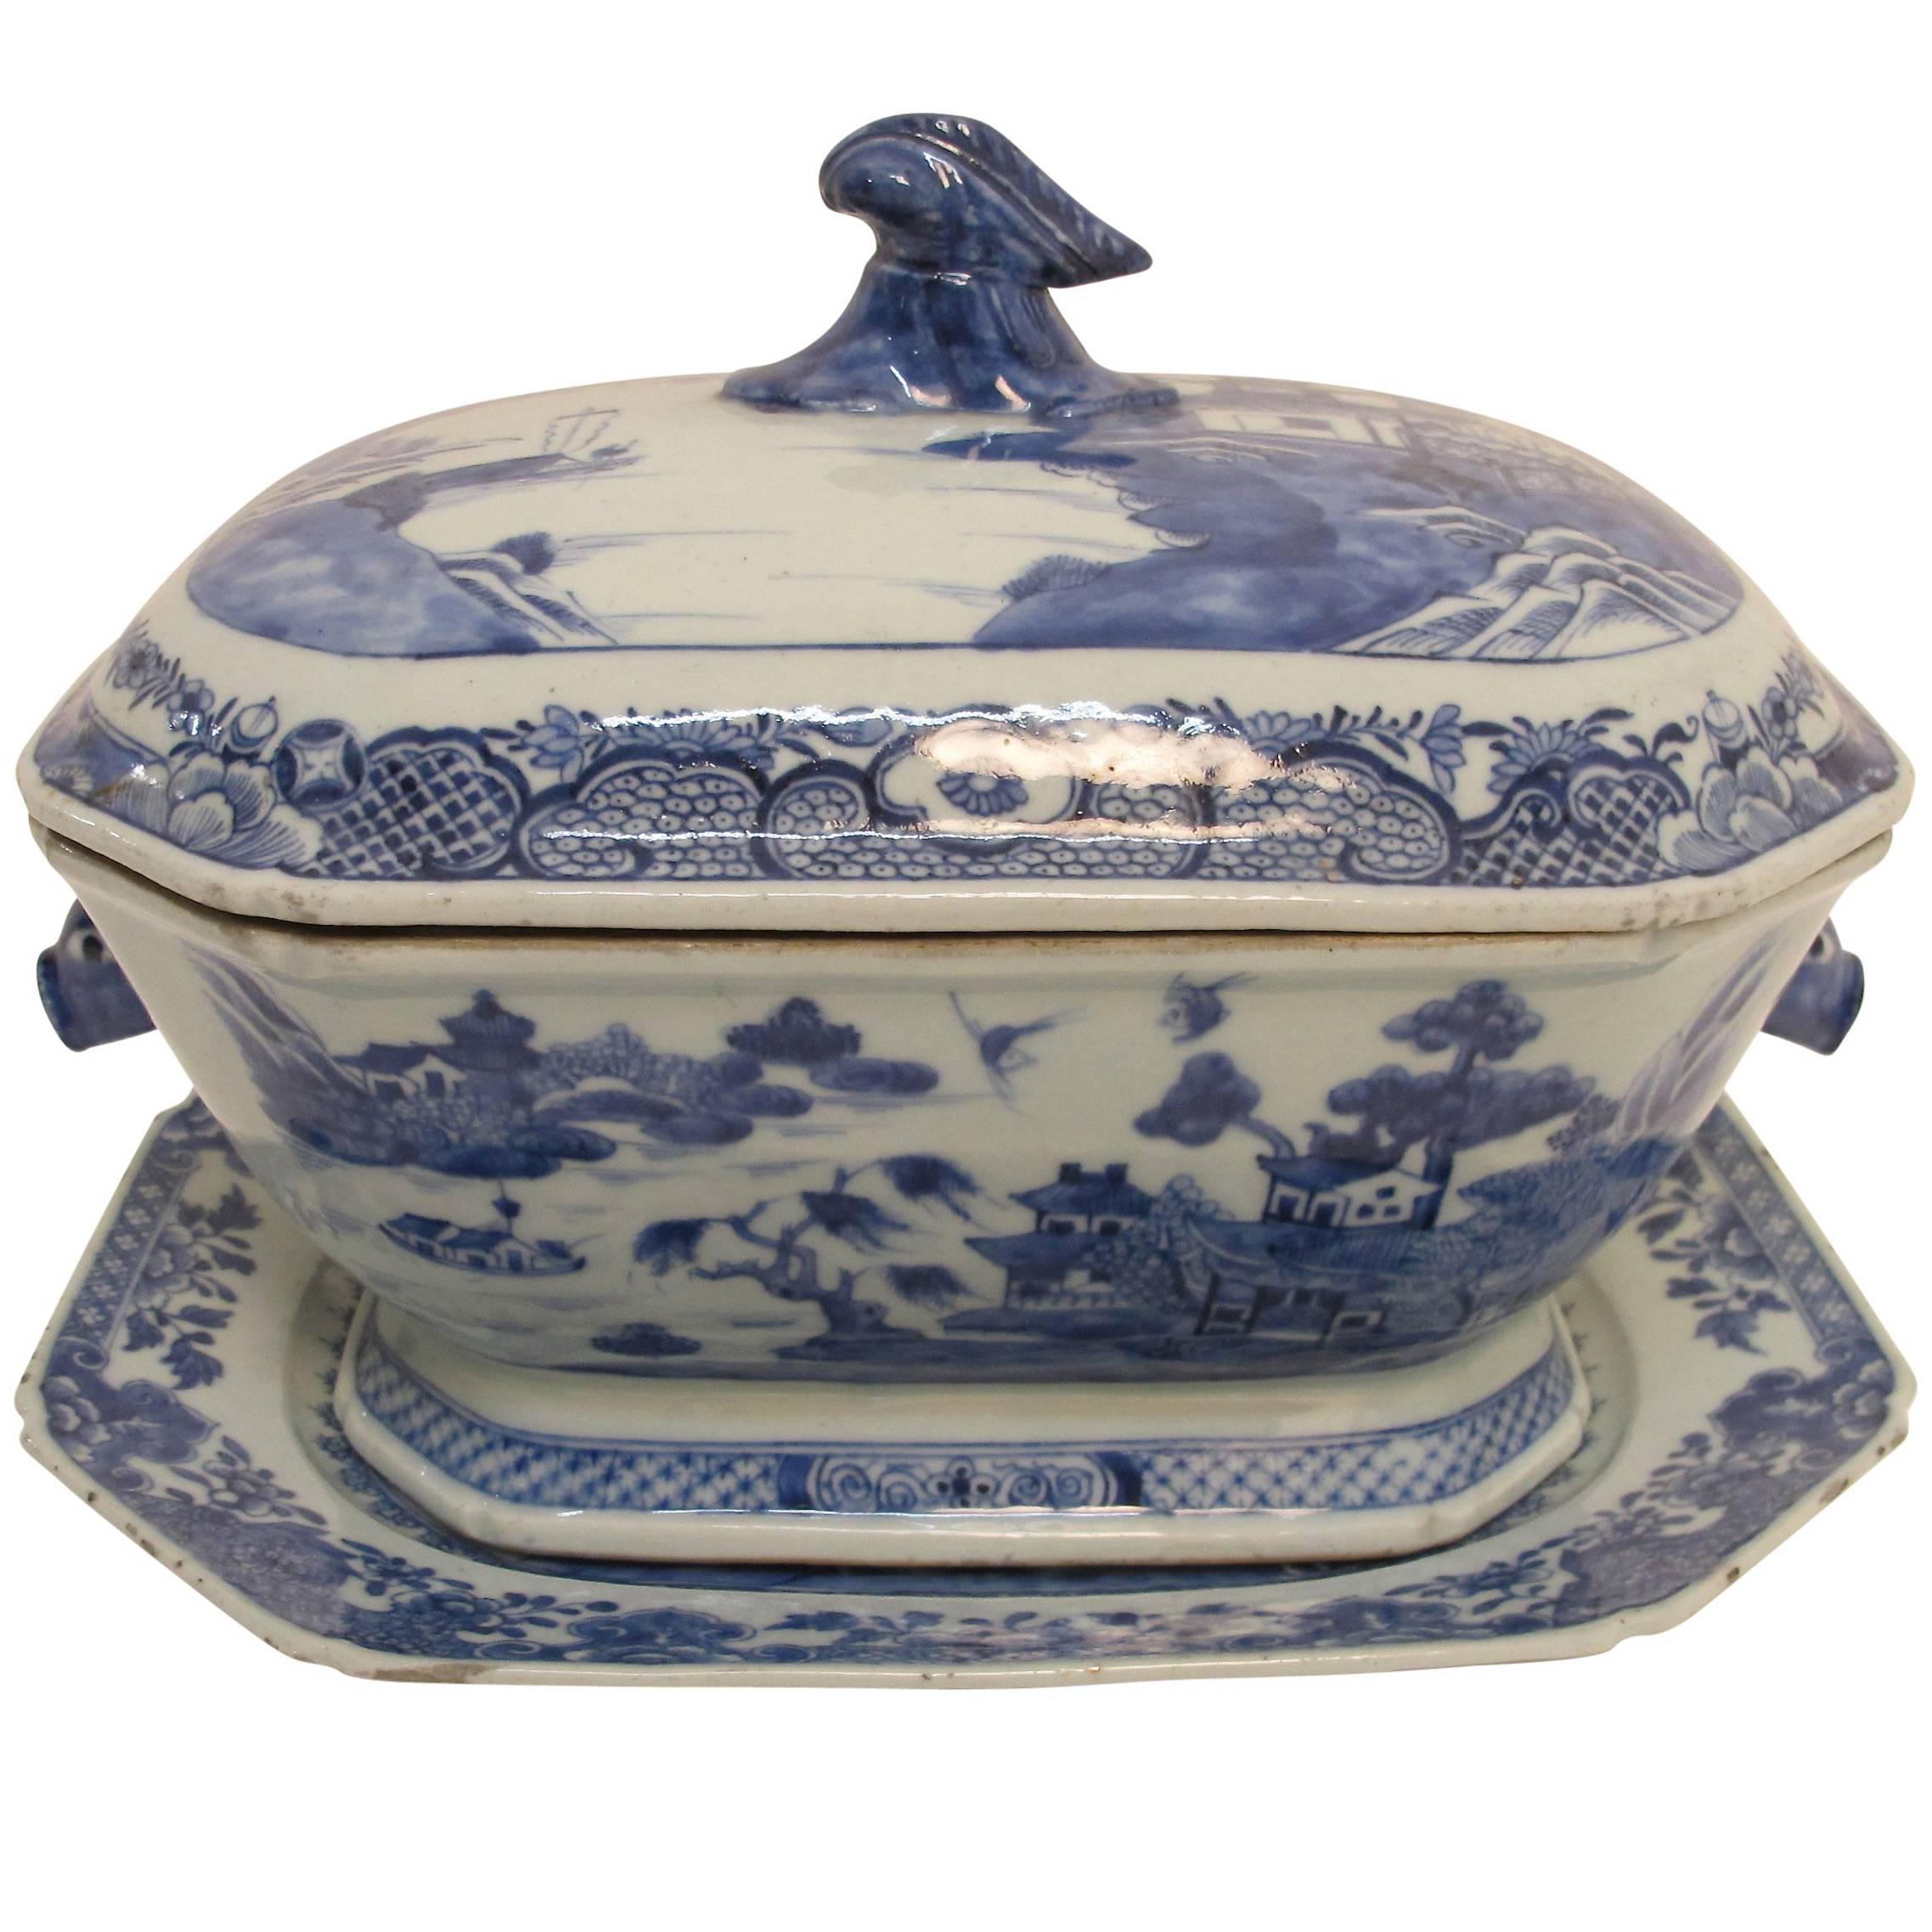 Blue and White Nanking Ware Tureen, Chinese Export 19th Century